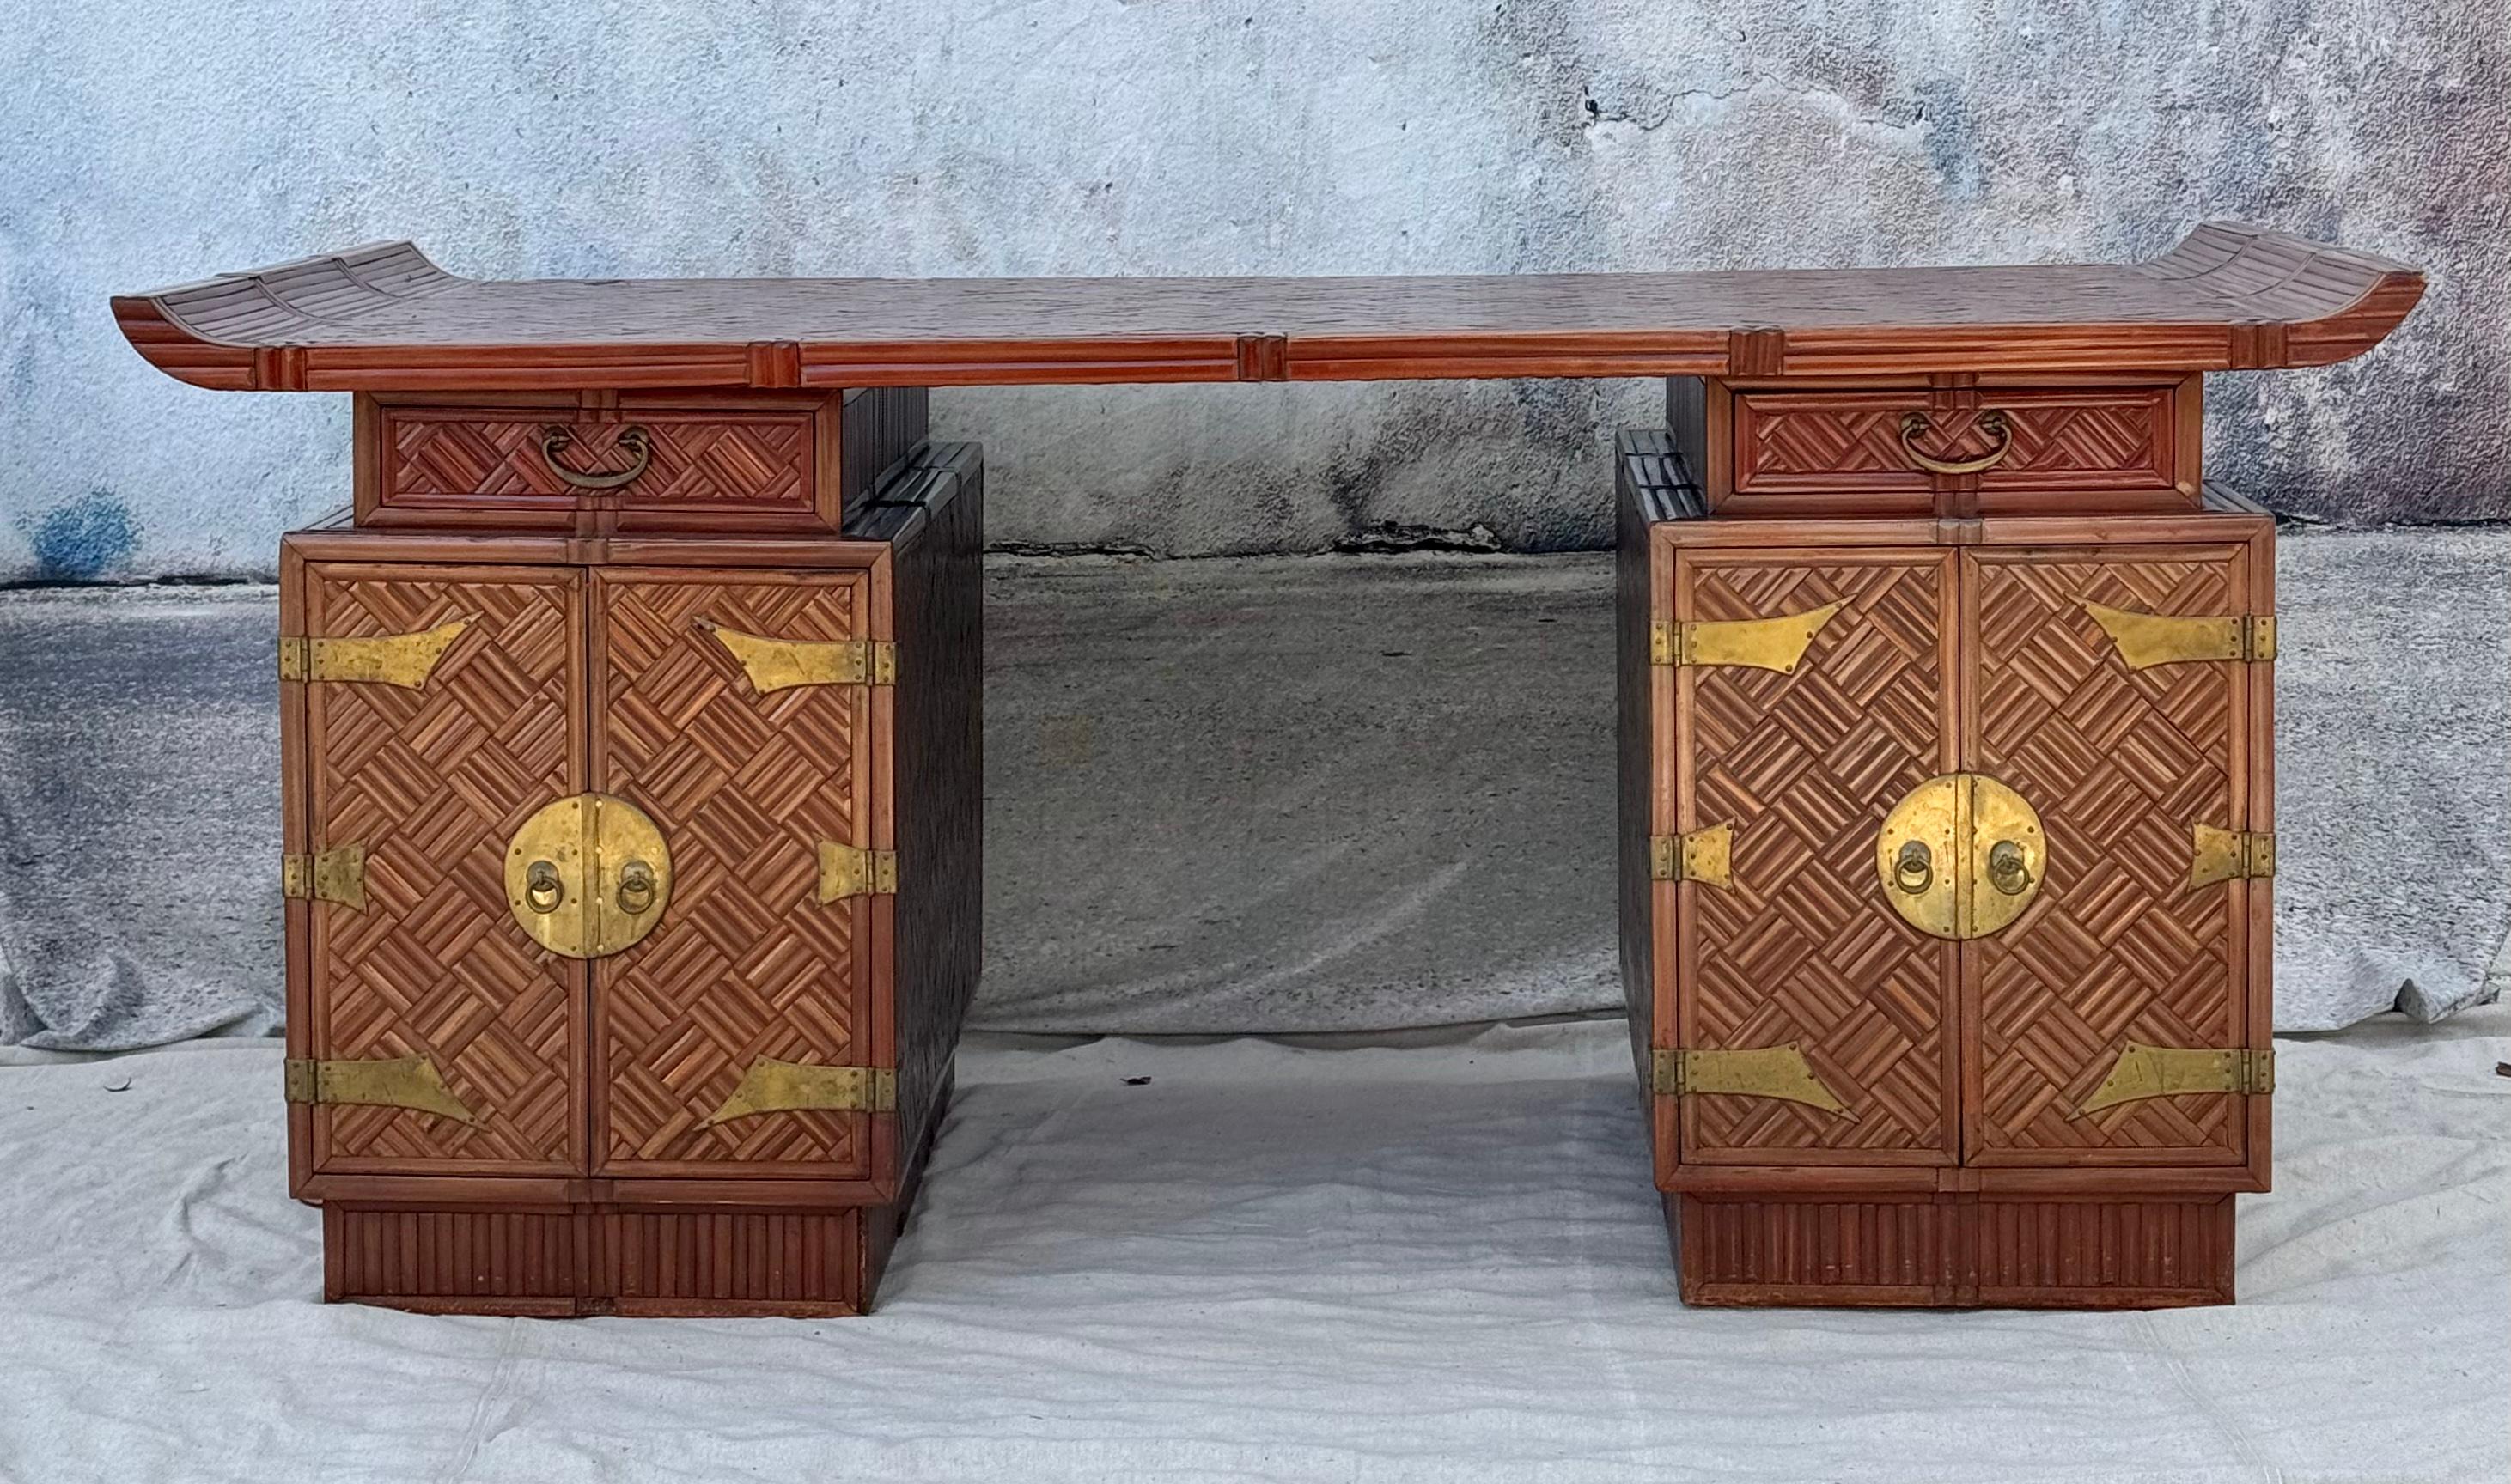 A rare and unique Mid Century Chinese Export Partners Desk, Applied Bamboo over Hardwood. A partner's desk describes a desk in which two people can work opposite each other. This desk features a bamboo top with Pagoda style ends adding a distinctive